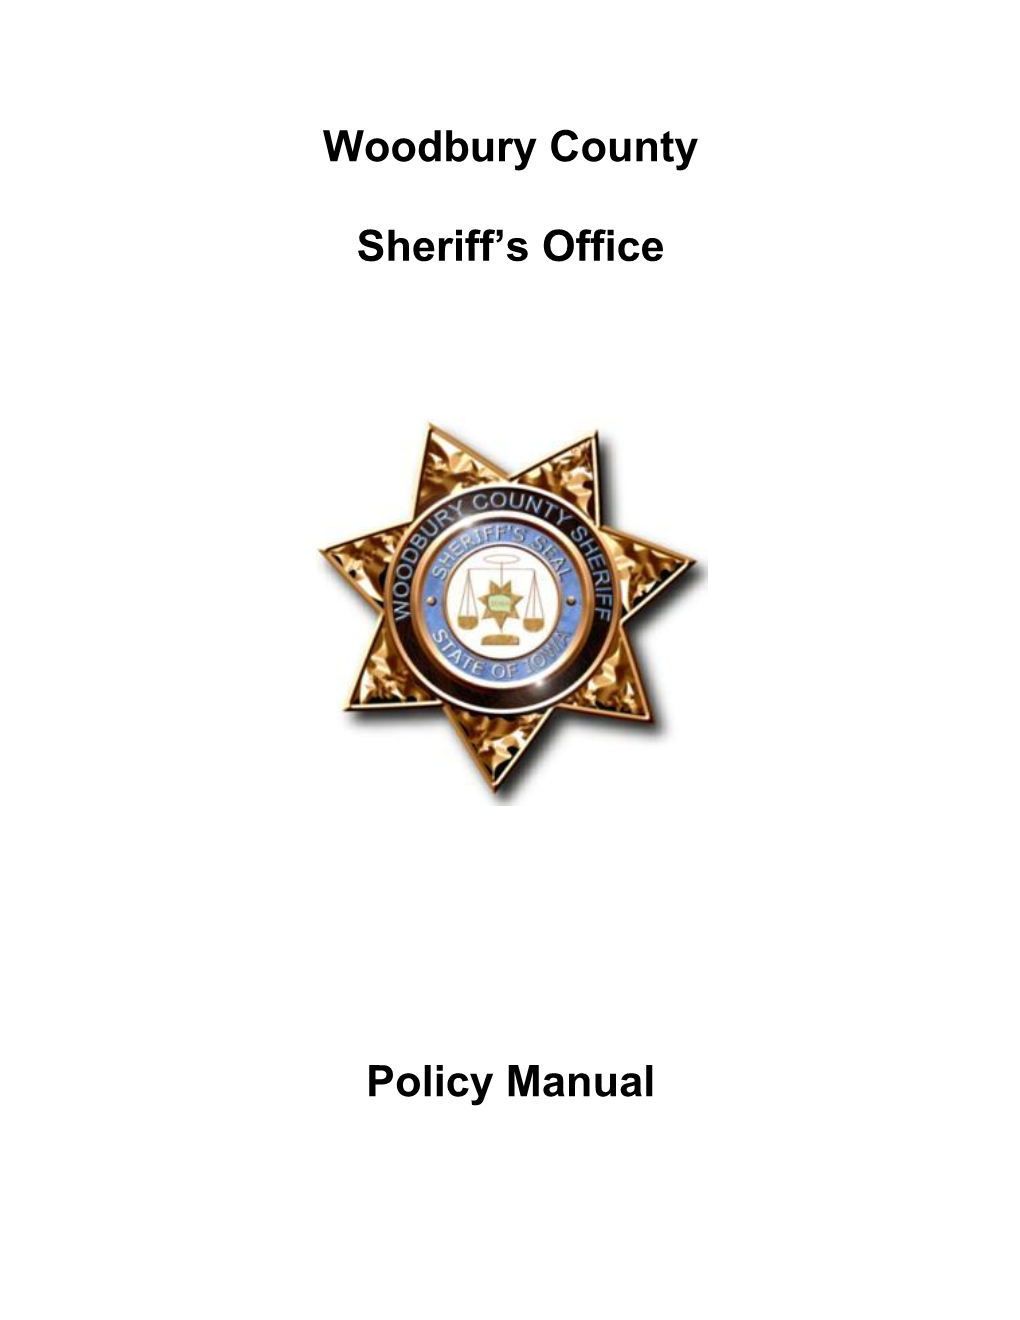 Woodbury County Sheriff's Office Policy Manual